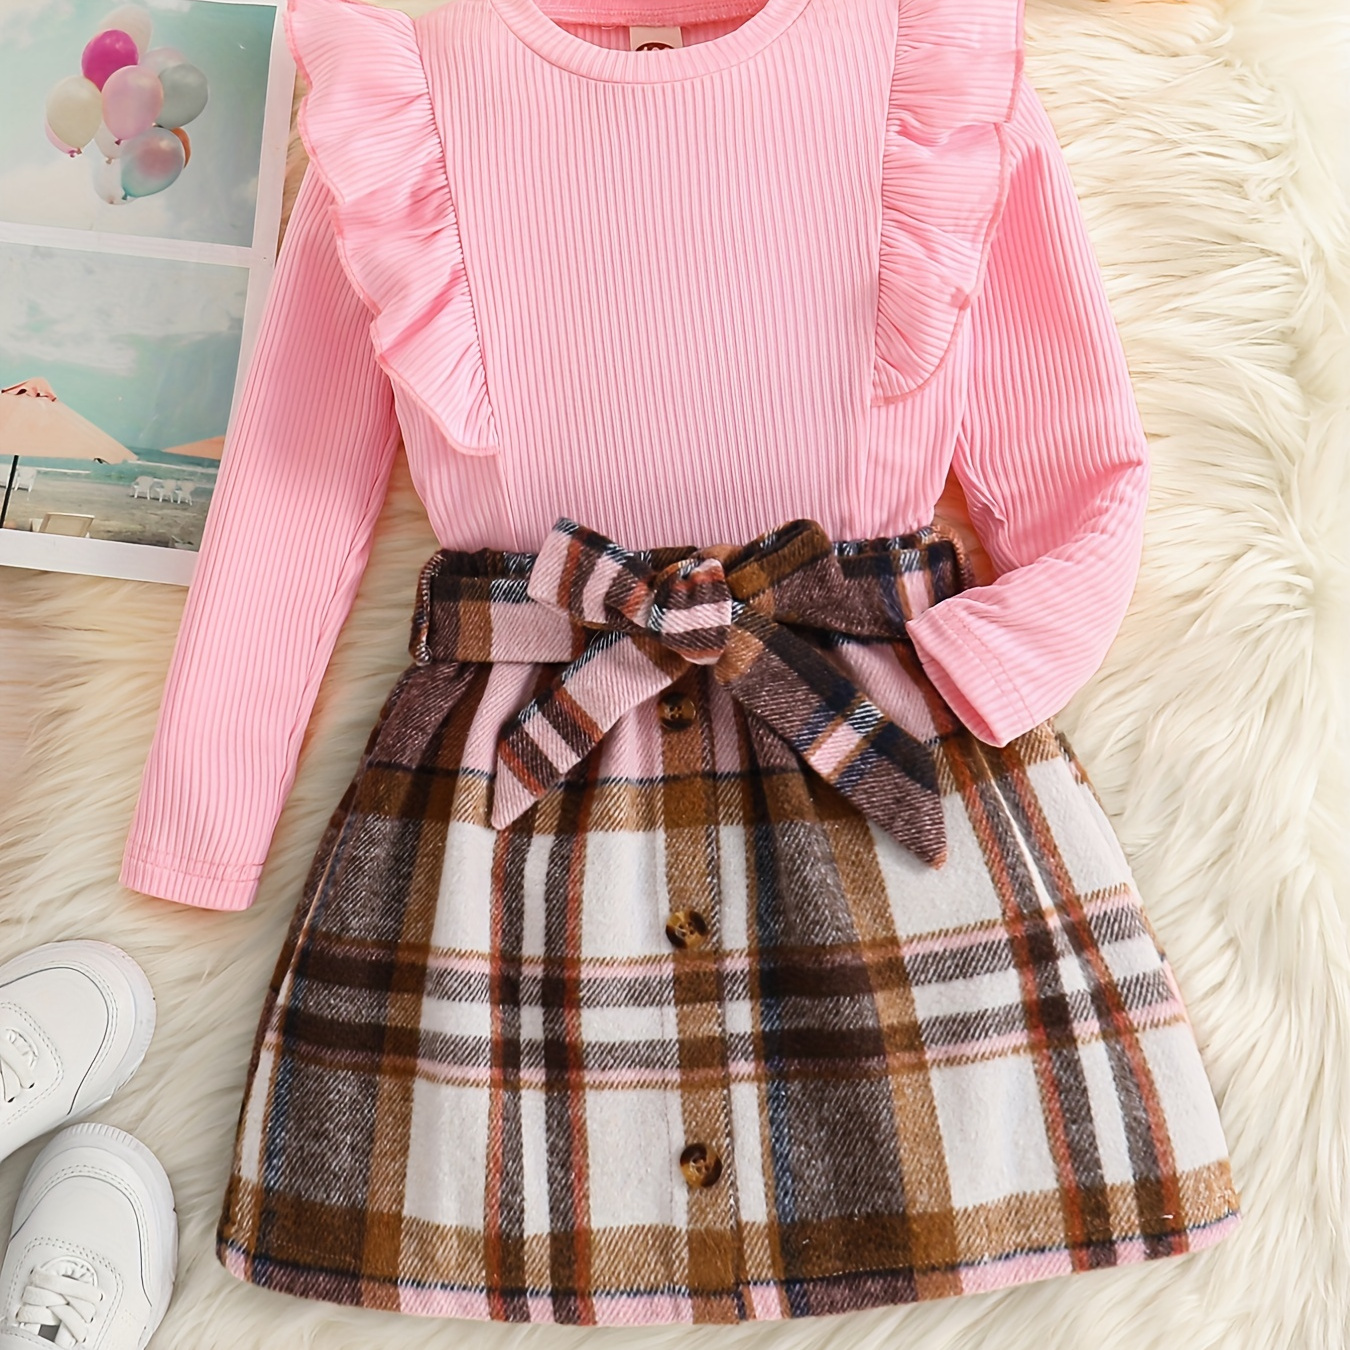 

Toddler Girl's Casual Outfit 2pcs, Ribbed Top & Belted Plaid Skirt Set, Kid's Clothes For Spring Autumn